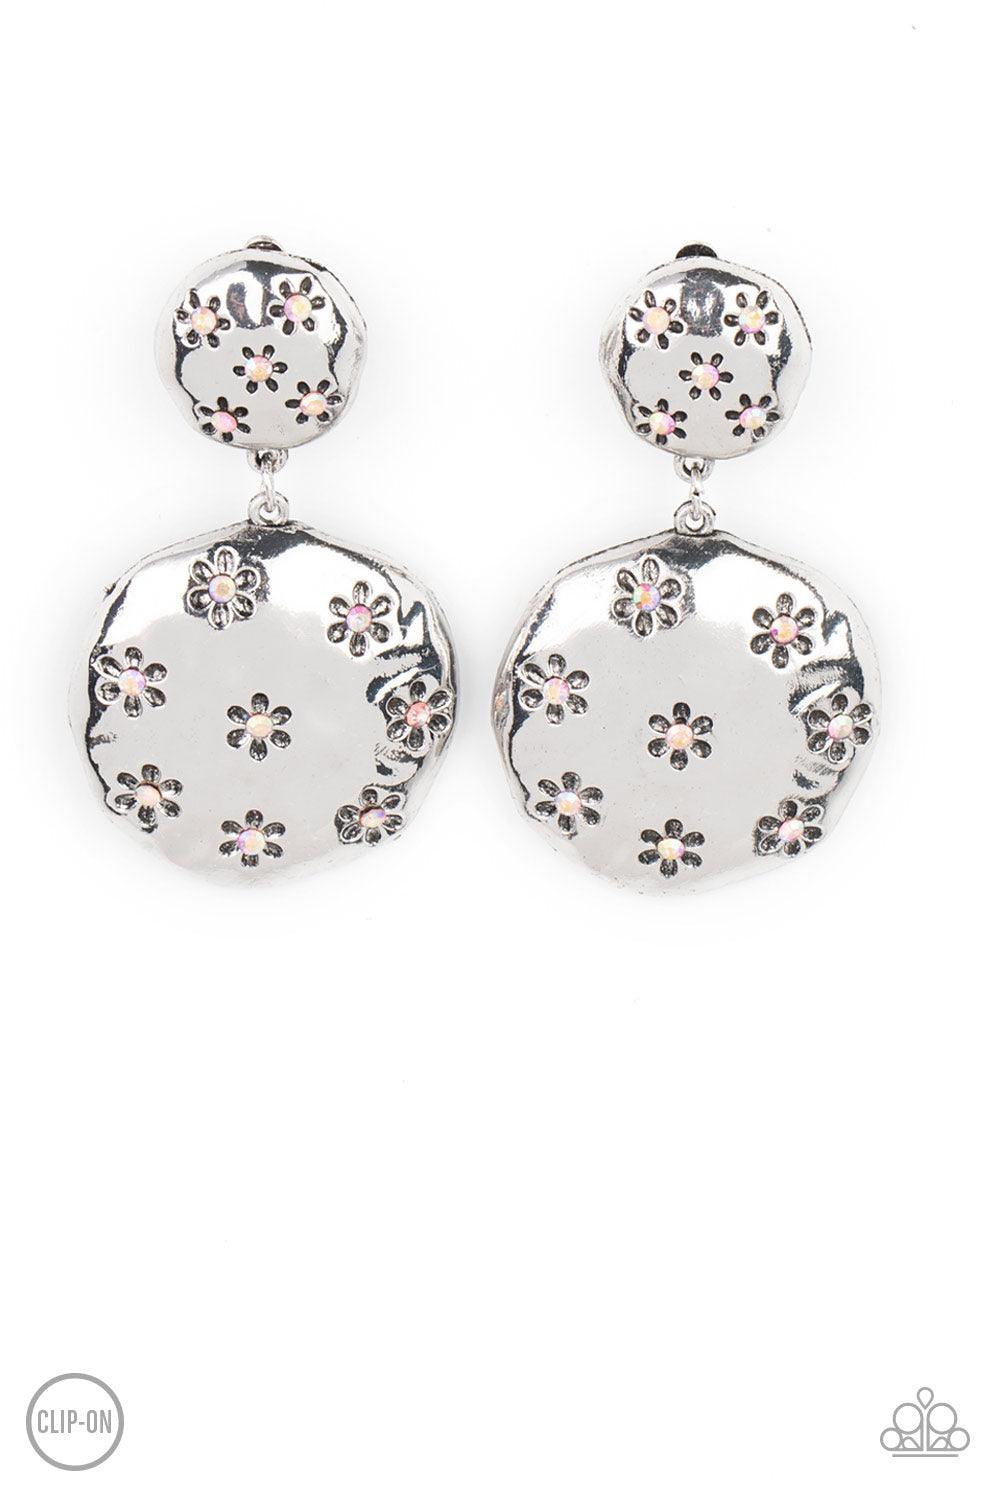 Paparazzi Accessories Industrial Fairytale - Pink *Clip-On Dotted with dainty iridescent pink rhinestone centers, an antiqued floral pattern is stamped across the fronts of two hammered silver discs that delicately connect into a rustic lure. Earring atta